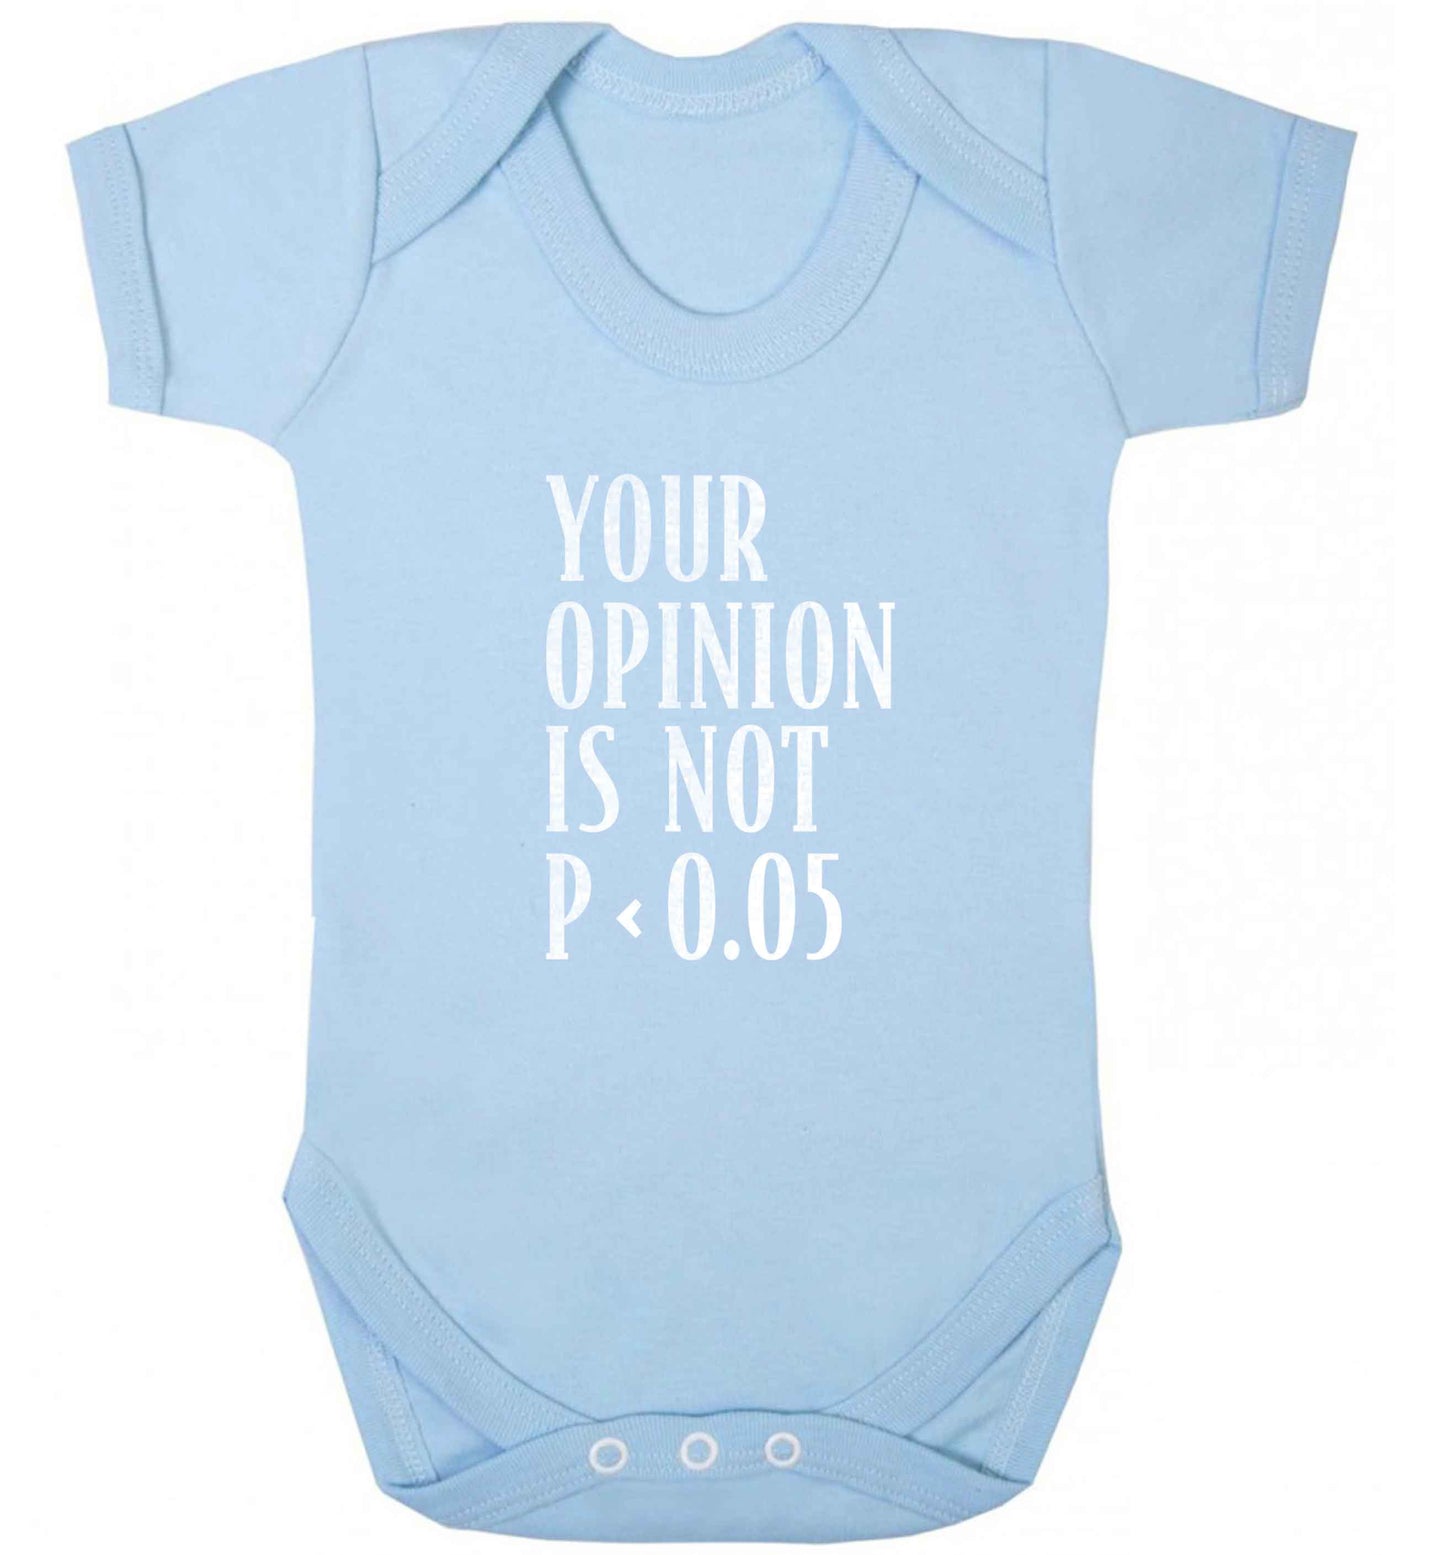 Your opinion is not P < 0.05baby vest pale blue 18-24 months